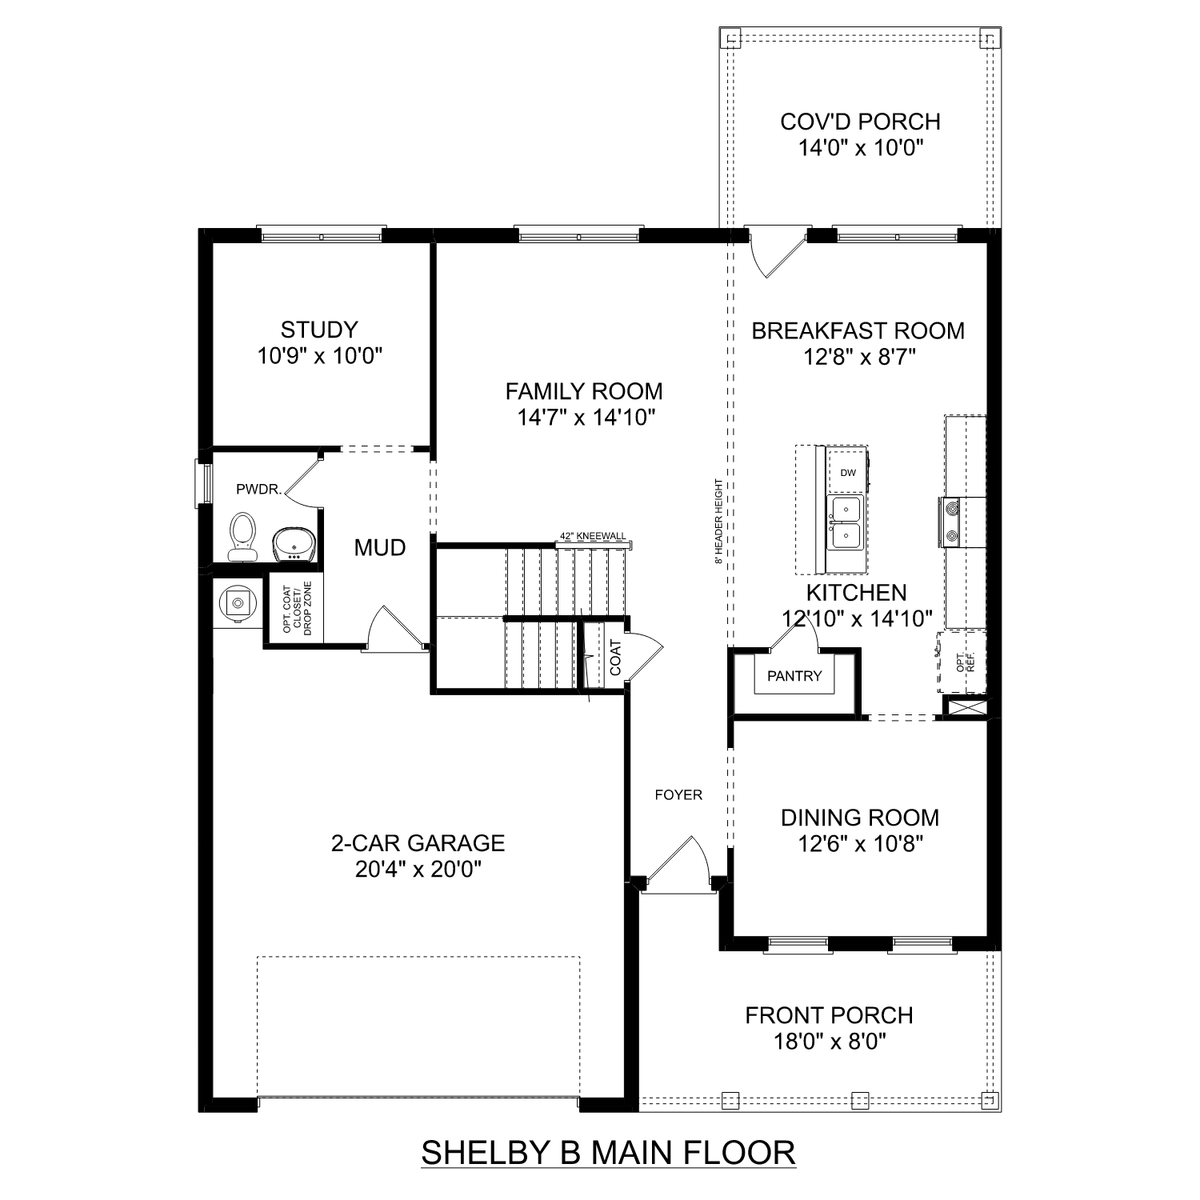 1 - The Shelby B buildable floor plan layout in Davidson Homes' Pavilion community.